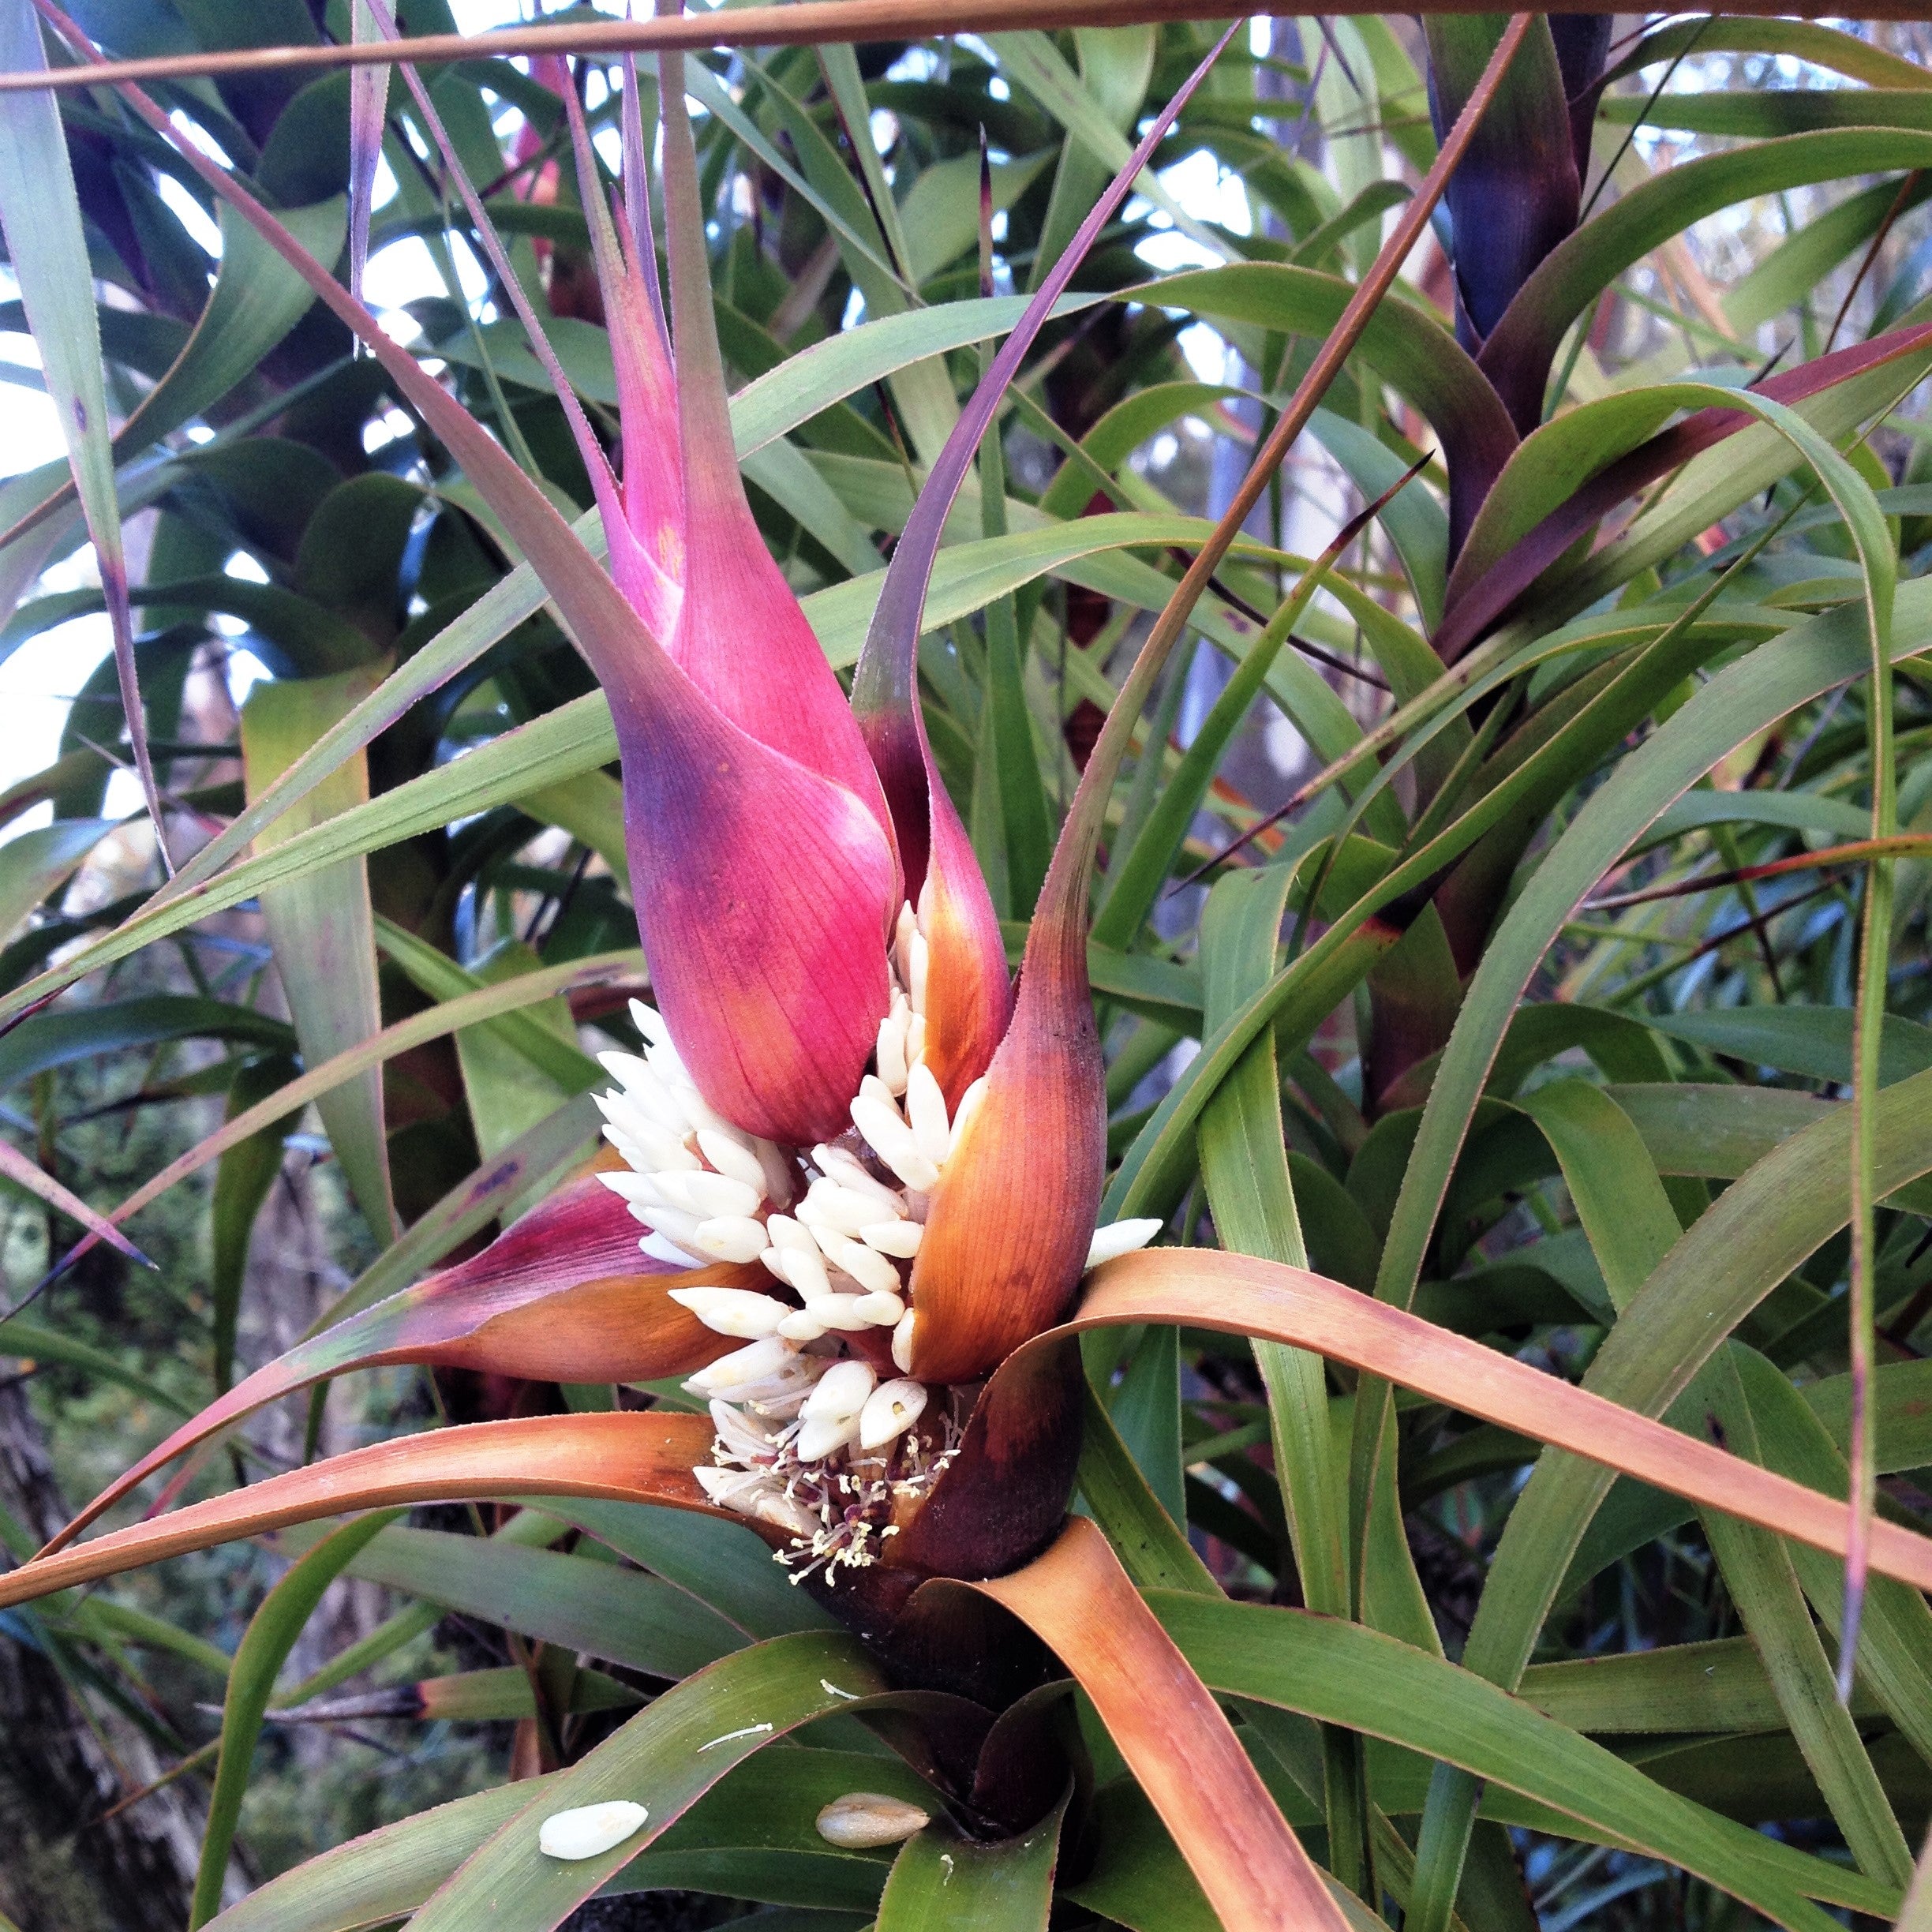 Richea dracophylla (Ericaceae): The Queen of Tasmanian Dragons